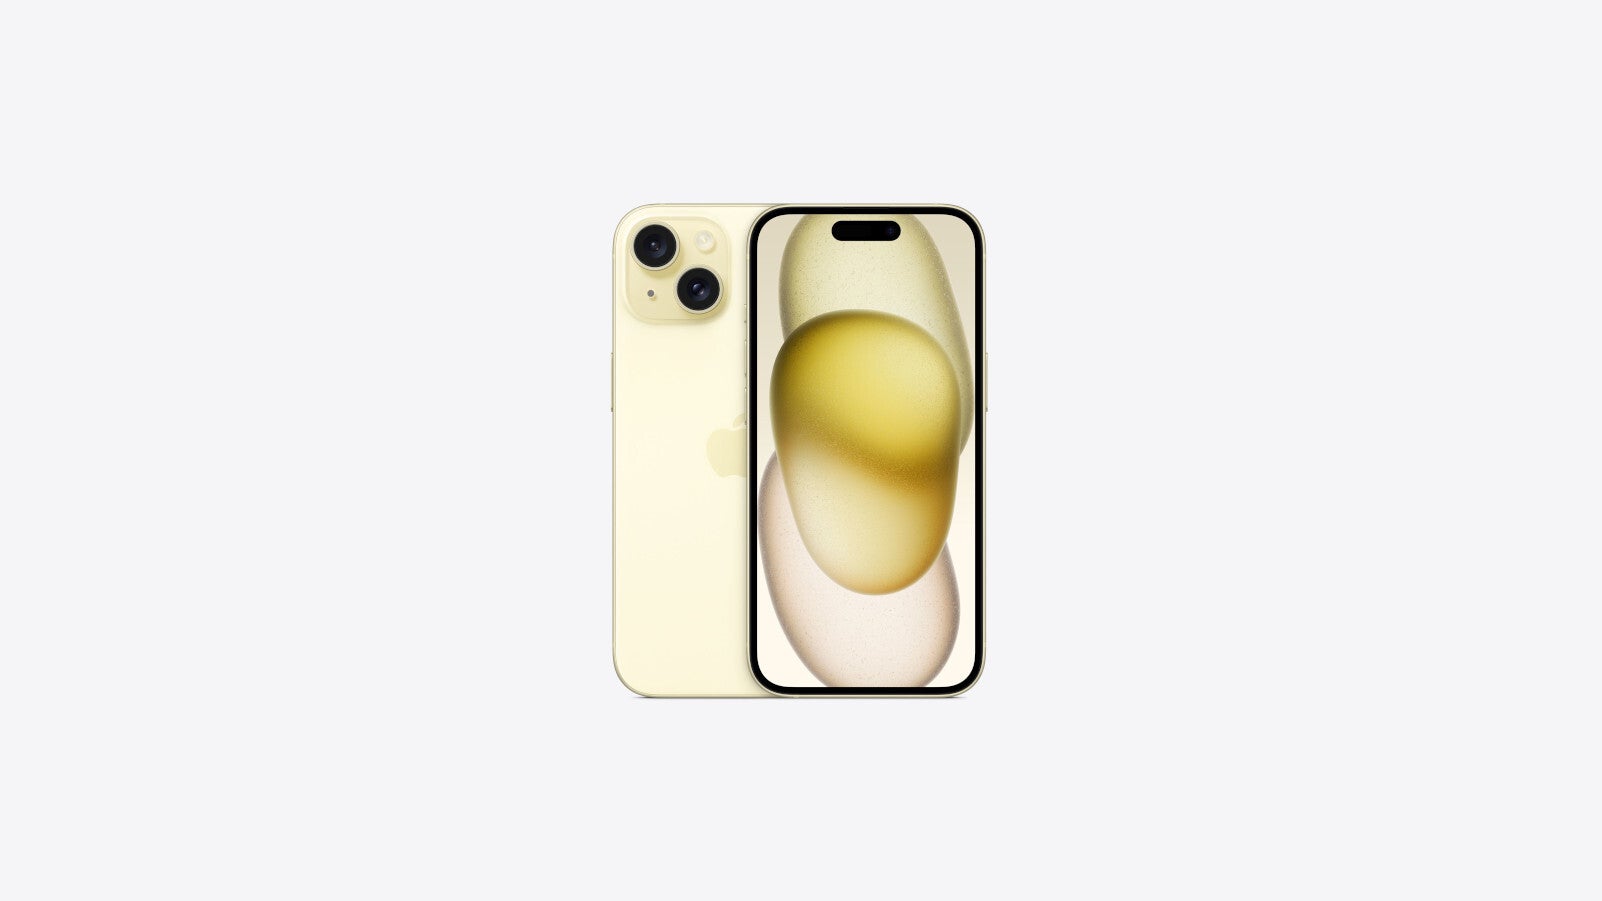 The iPhone 15 in Yellow (Image Credit - Apple) - iPhone 15 colors: finding yours across 15, Pro, and Pro Max